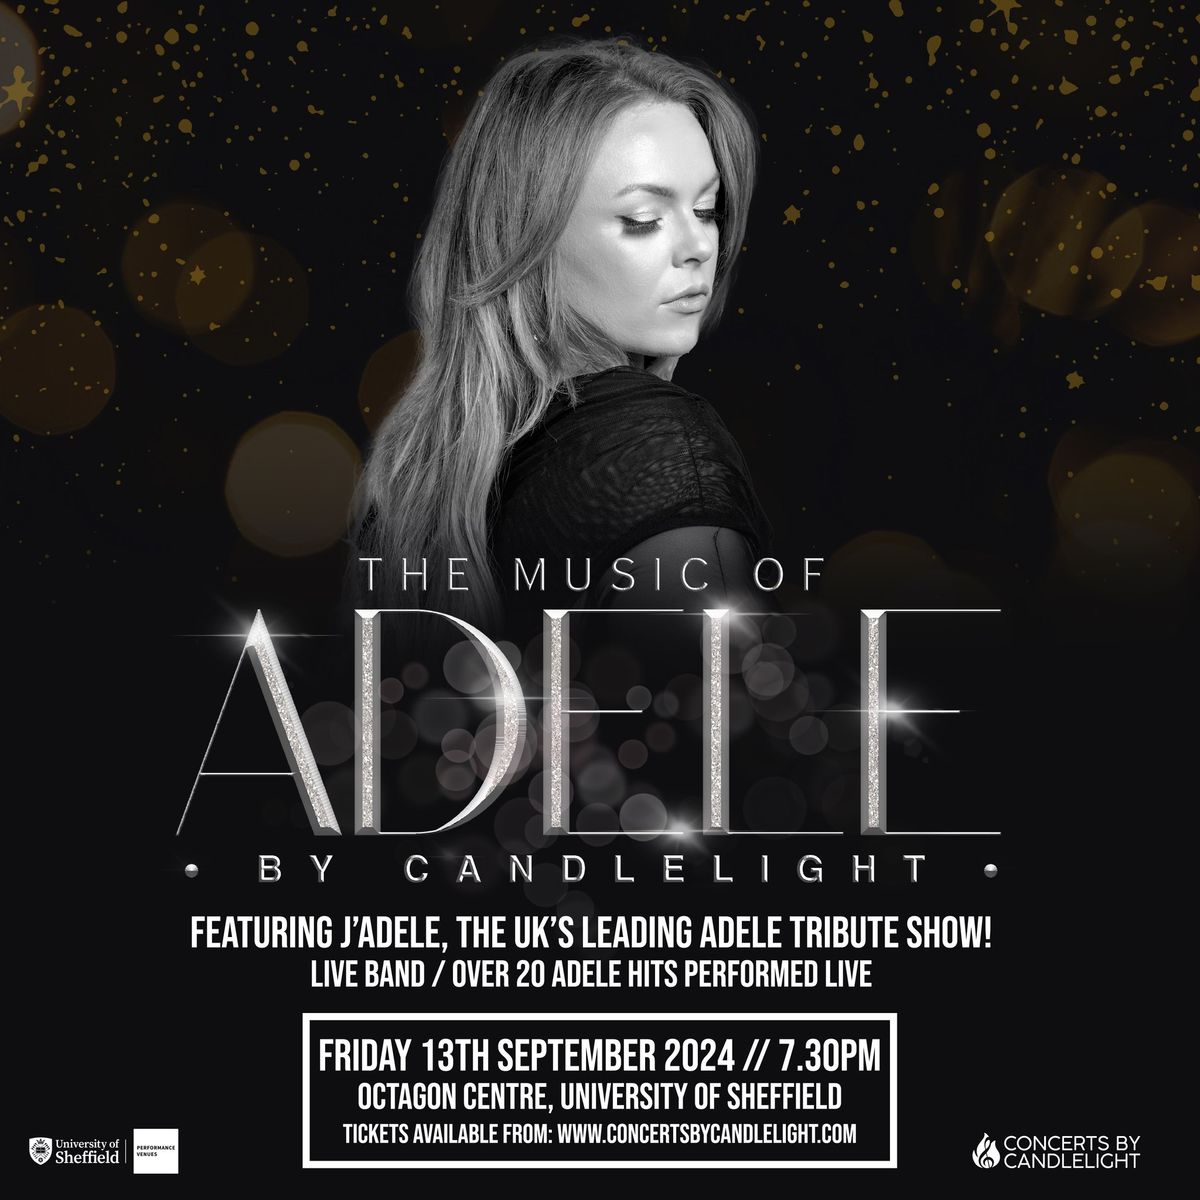 The Music Of Adele By Candlelight At The Octagon Centre, Sheffield